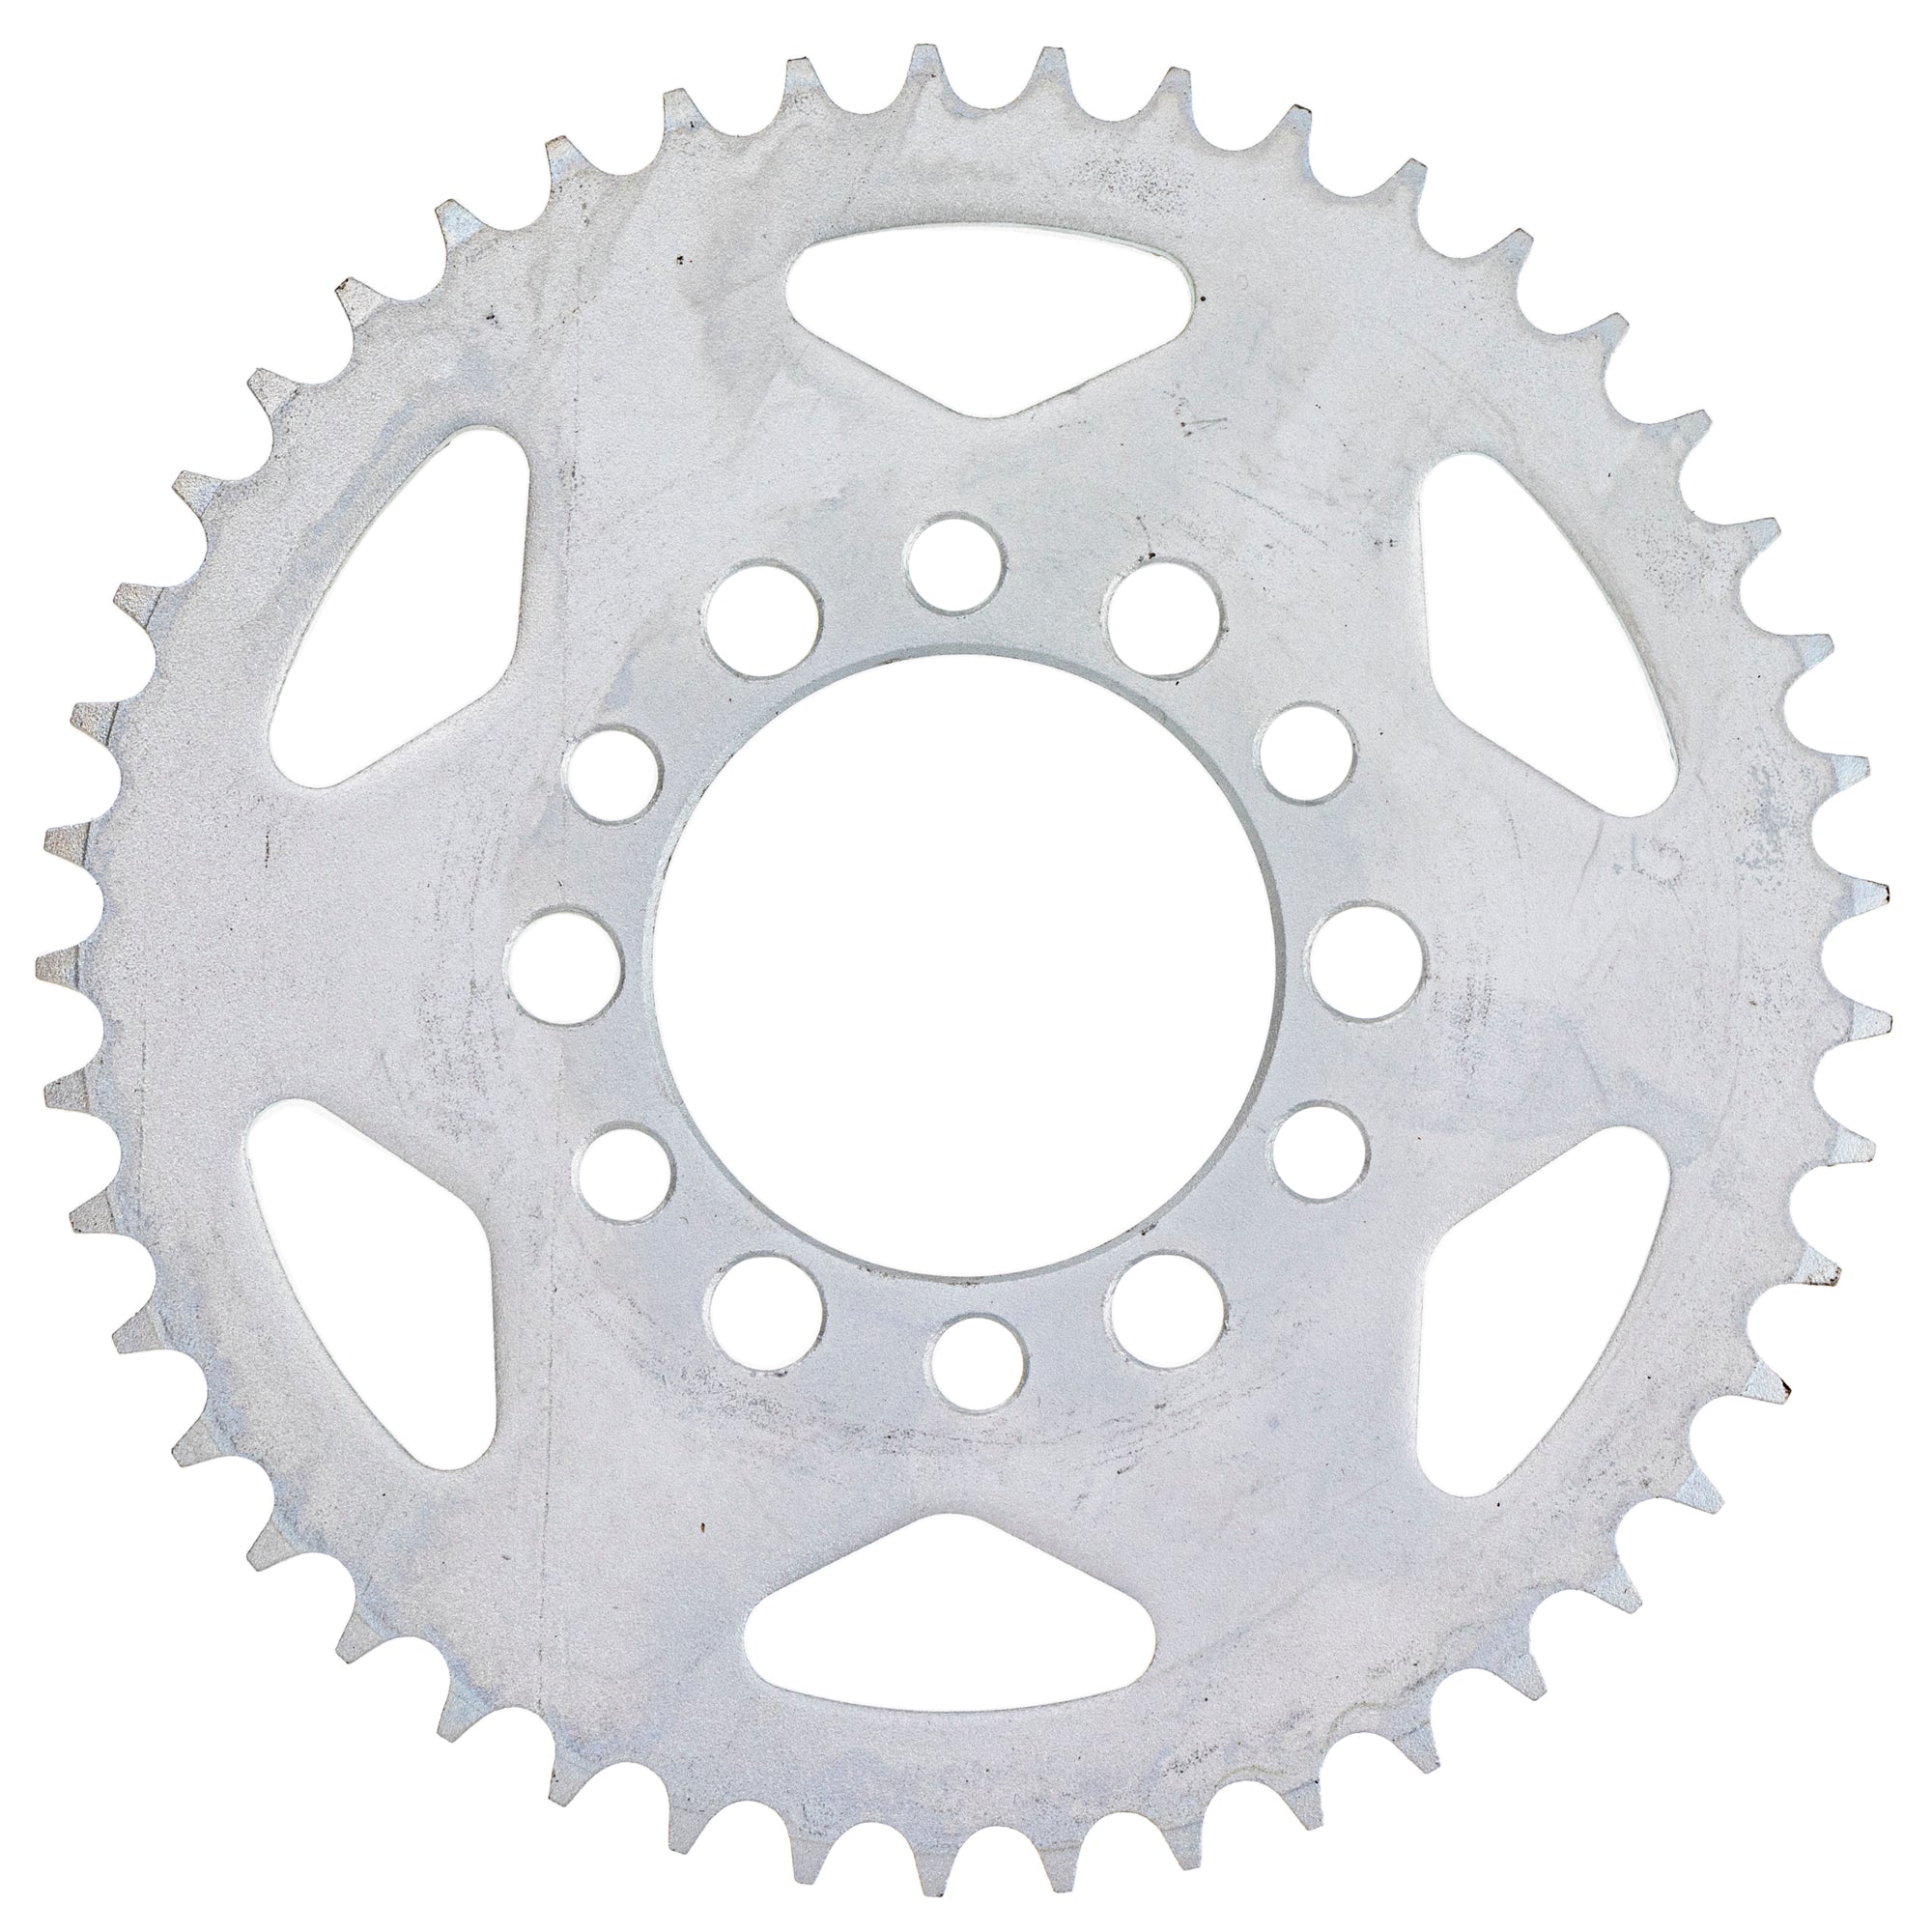 428 Pitch Front 14T Rear 45T Drive Sprocket Kit for Yamaha TW200 TW225